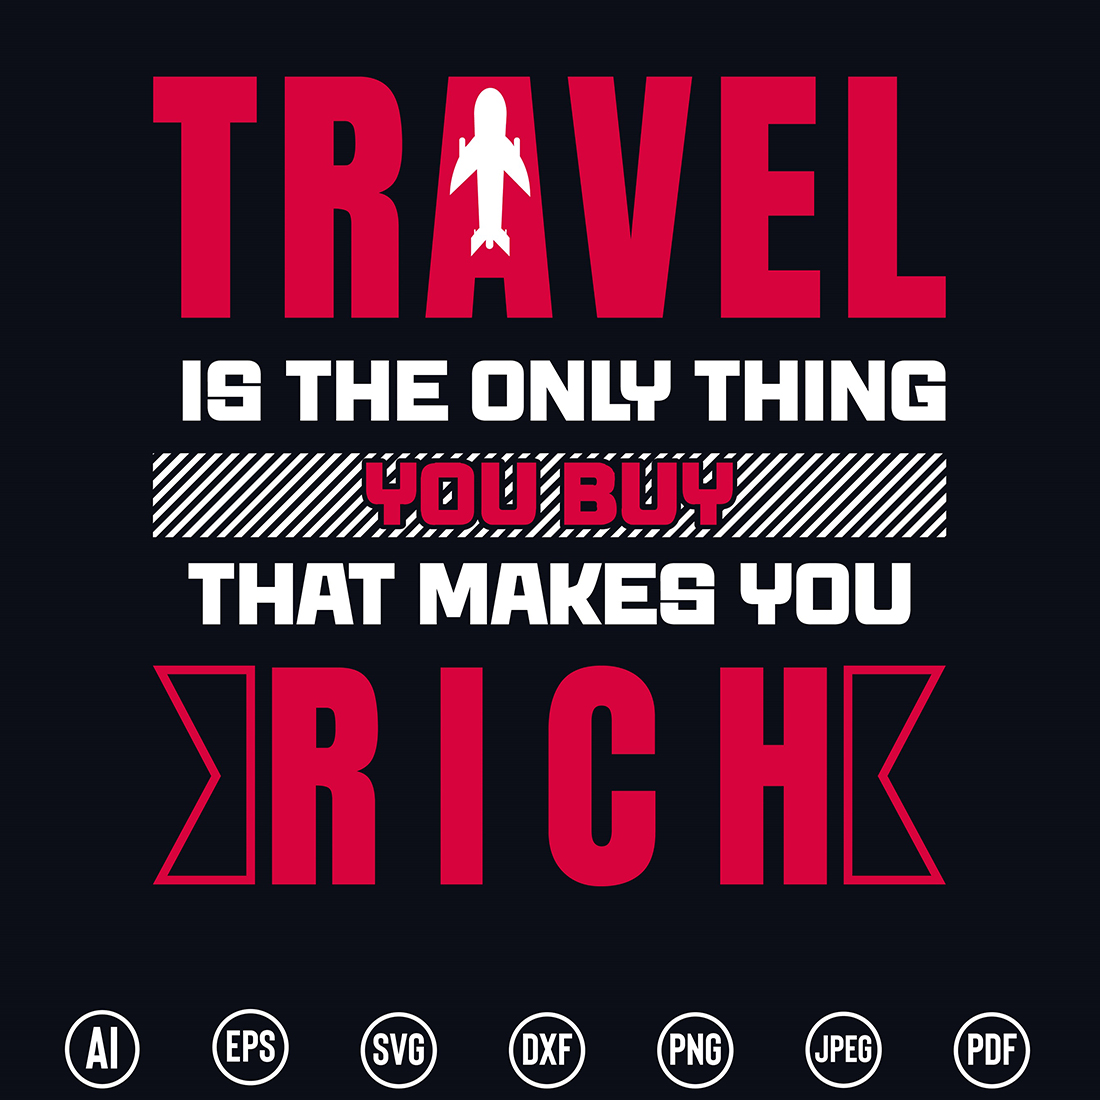 Modern Typography Travel T-Shirt design with “Travel is the only thing your buy that makes you rich” quote for t-shirt, posters, stickers, mug prints, banners, gift cards, labels etc preview image.